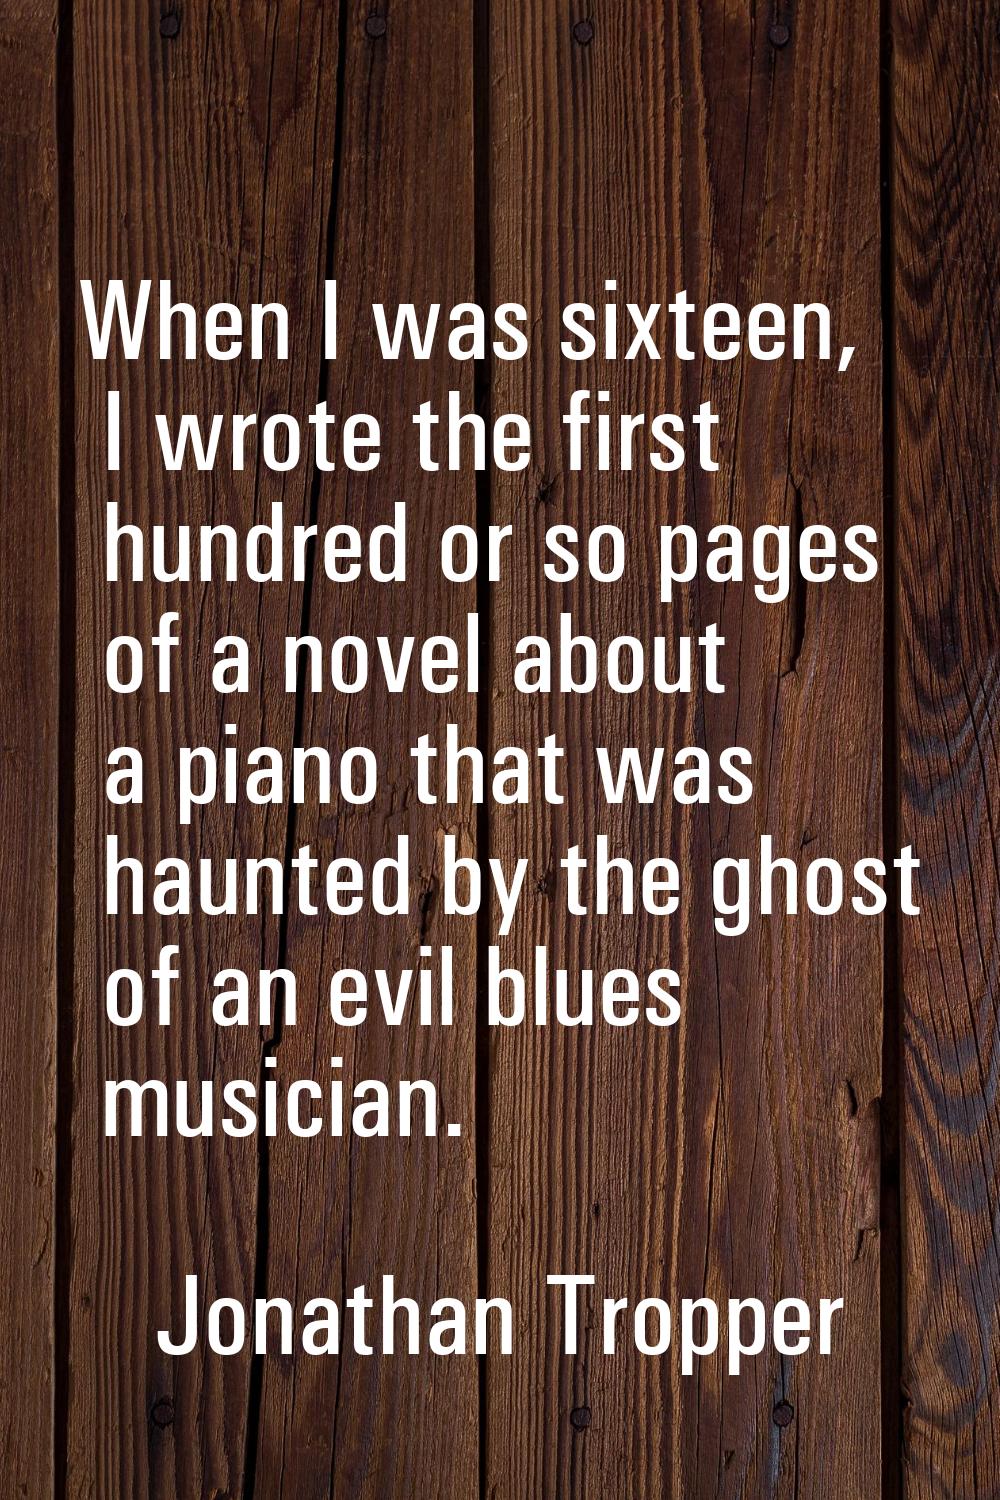 When I was sixteen, I wrote the first hundred or so pages of a novel about a piano that was haunted